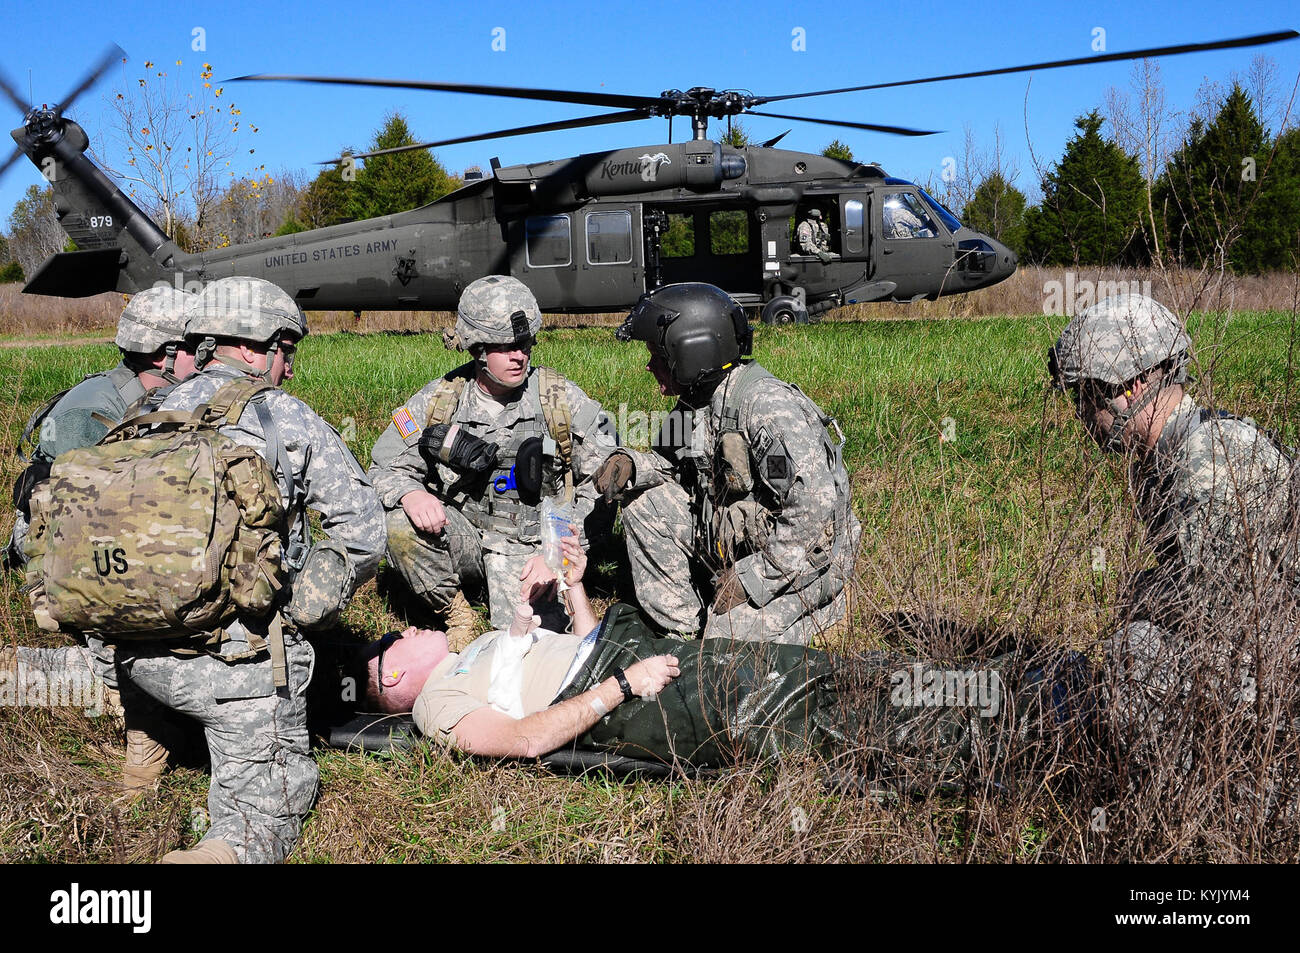 Flight Medic Staff Sgt. Jeremy Lowe with the 2nd Battalion, 238 Aviation Regiment consults with a medic team as they prepare to load a simulated casualty aboard a UH-60 Black Hawk MEDEVAC helicopter for transportation to a field hospital located at the Wendell H. Ford Regional Training Center in Greenville, Ky., Nov. 14. This exercise was a special addition to combat medic sustainment training that provided medics with real world experience working with flight medics and MEDEVAC flight crews that would only be available when deployed overseas. (U.S. Army National Guard photo by Sgt. 1st Class  Stock Photo